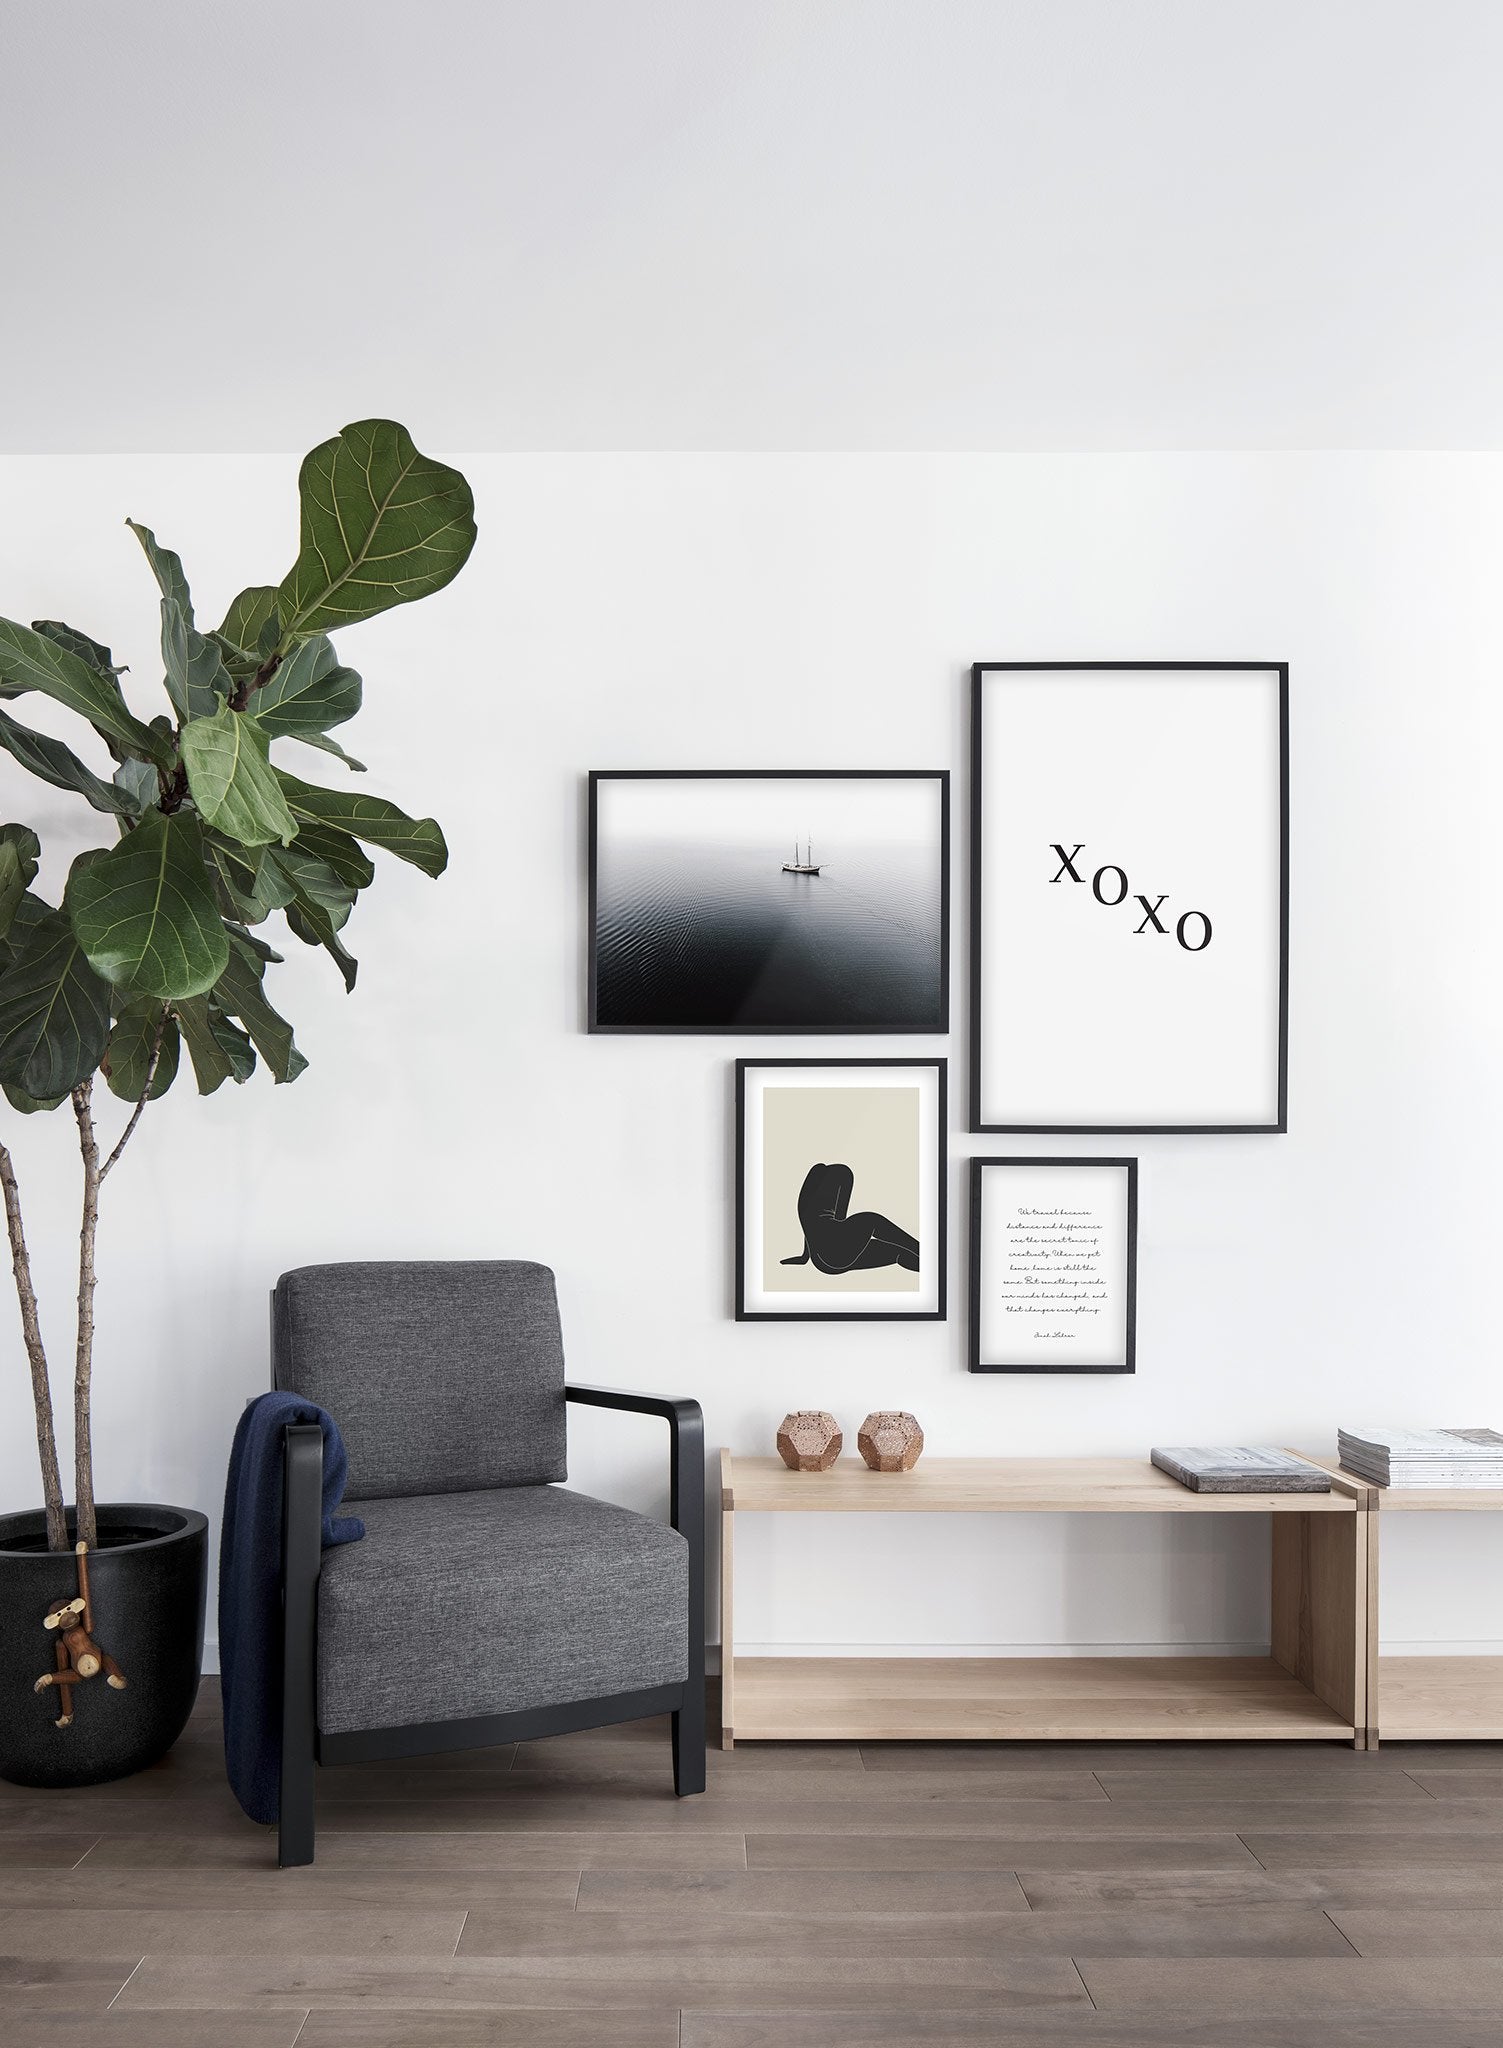 Scandinavian poster by Opposite Wall with black and white graphic typography design of XOXO - Living Room - Gallery Wall Quad